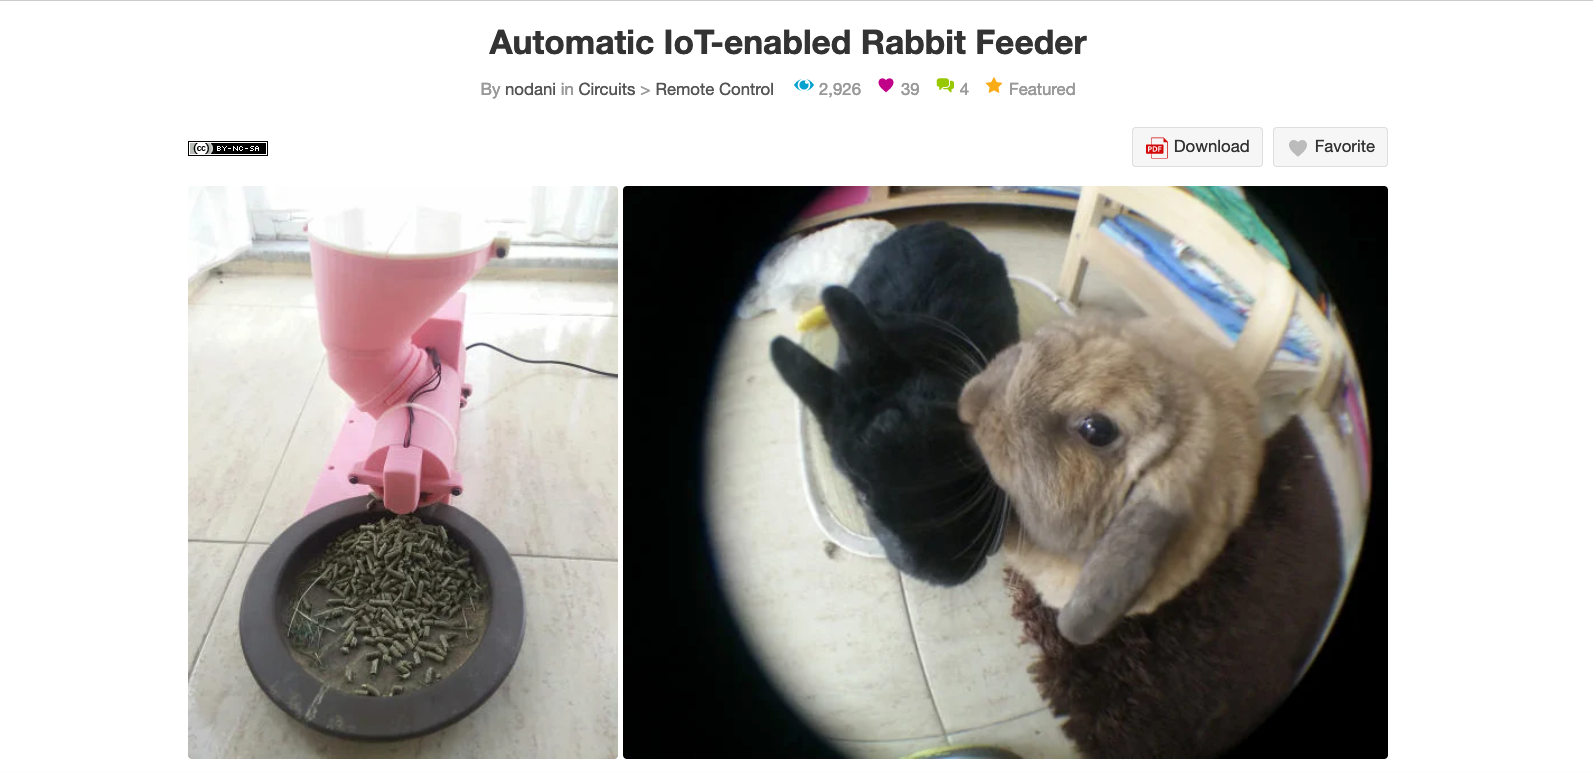 A screenshot showing an image of a pink DIY rabbit feeder next to an image of two rabbits